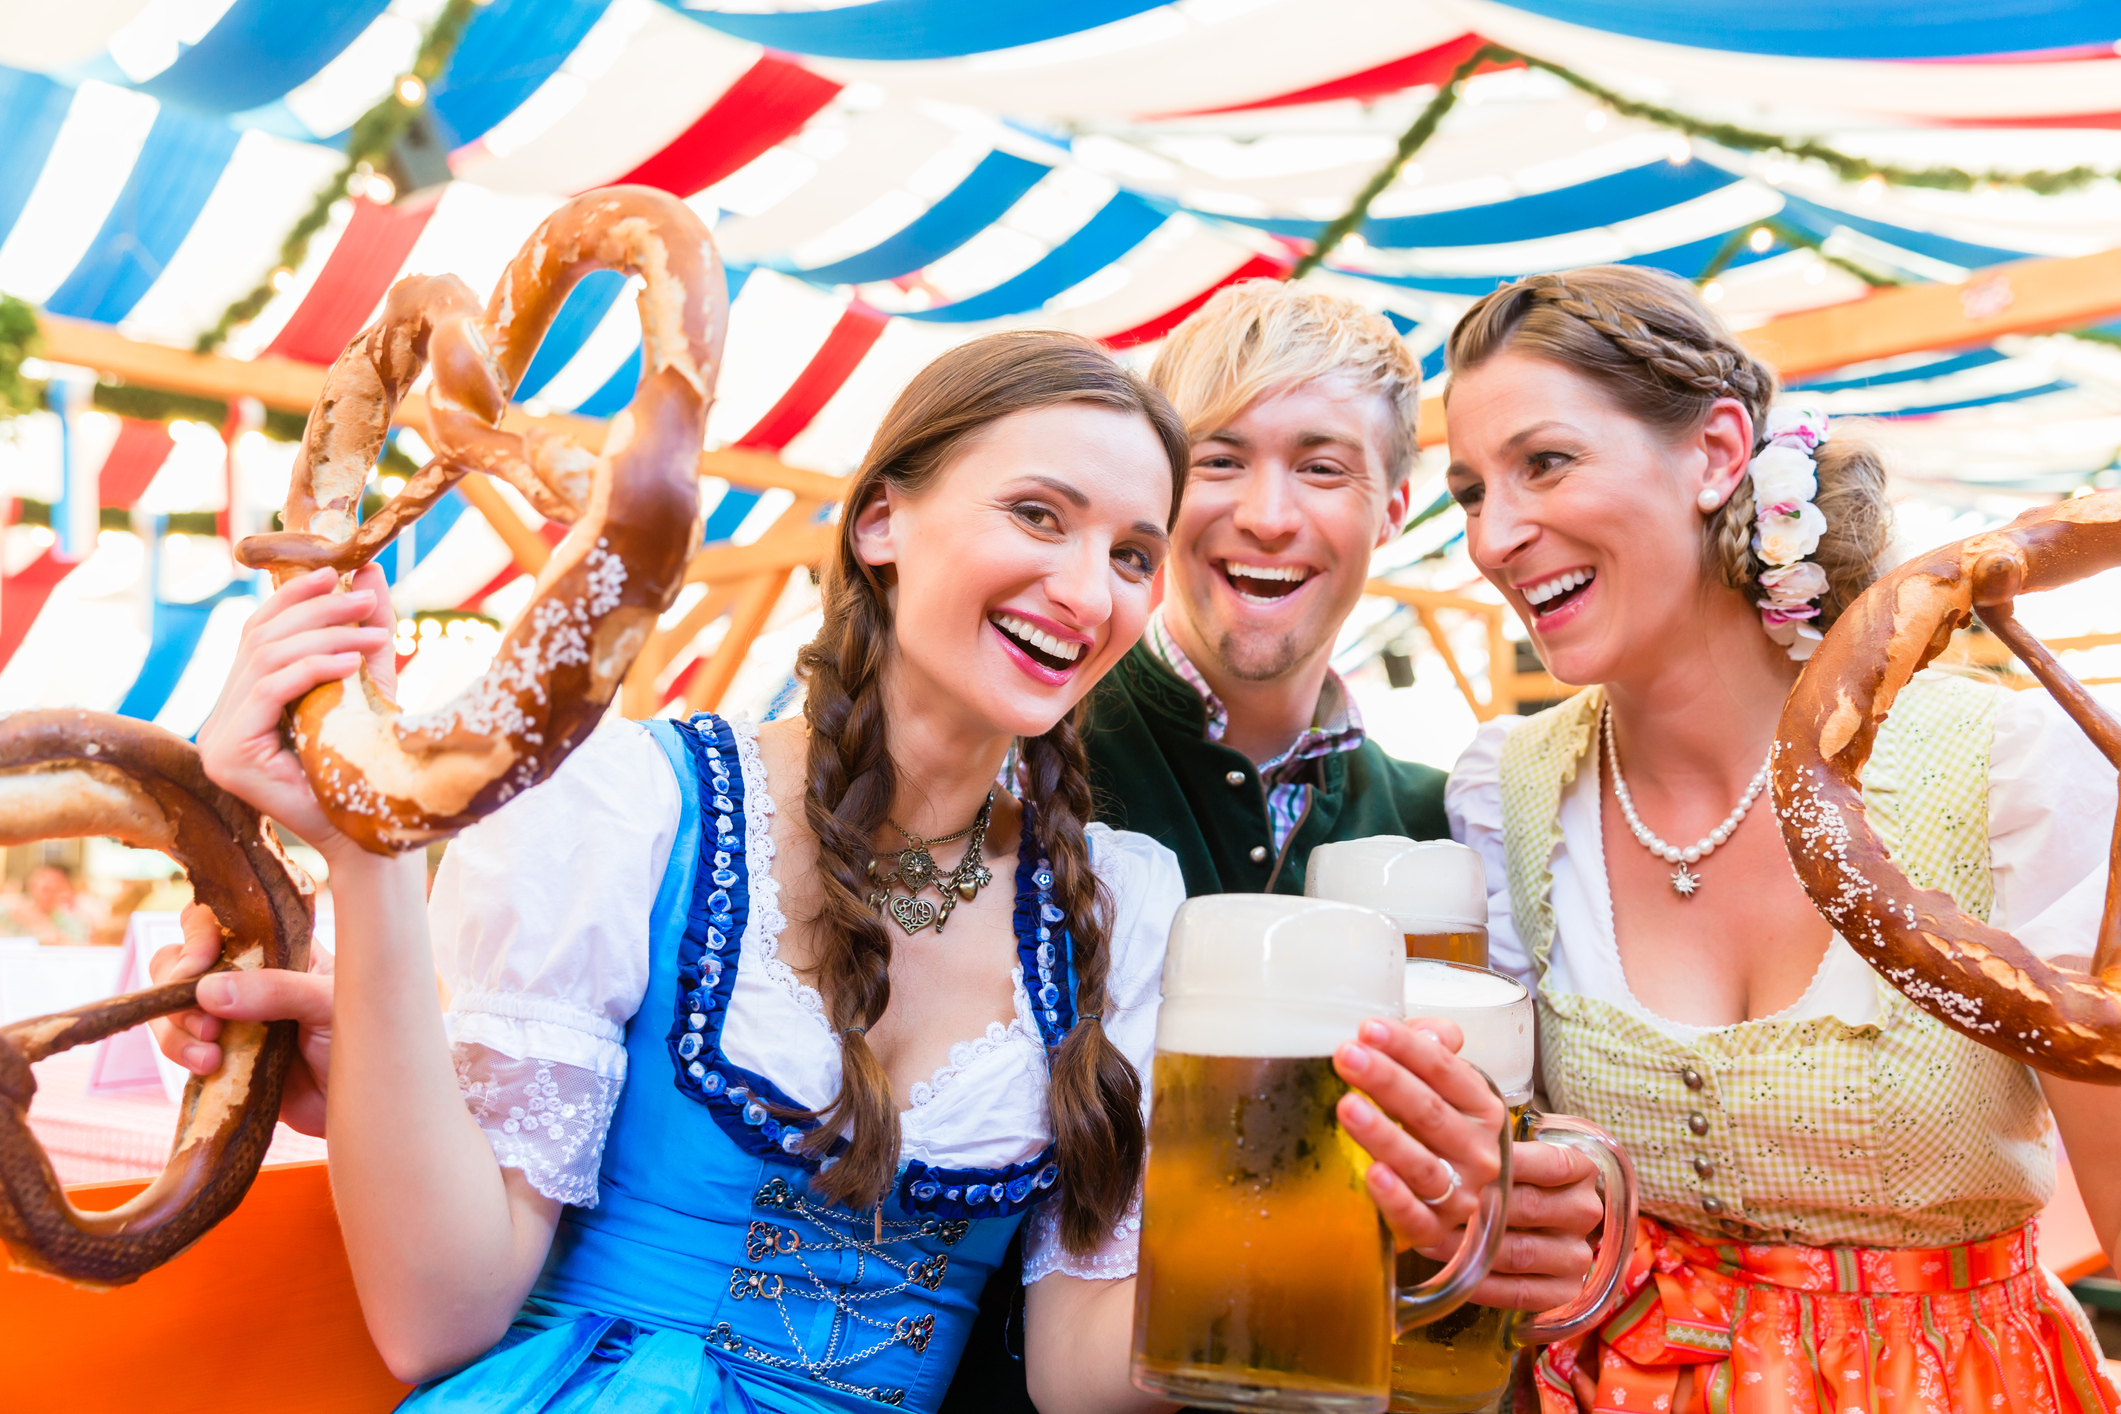 Oktoberfest full day package with beer, food, and afterparty!